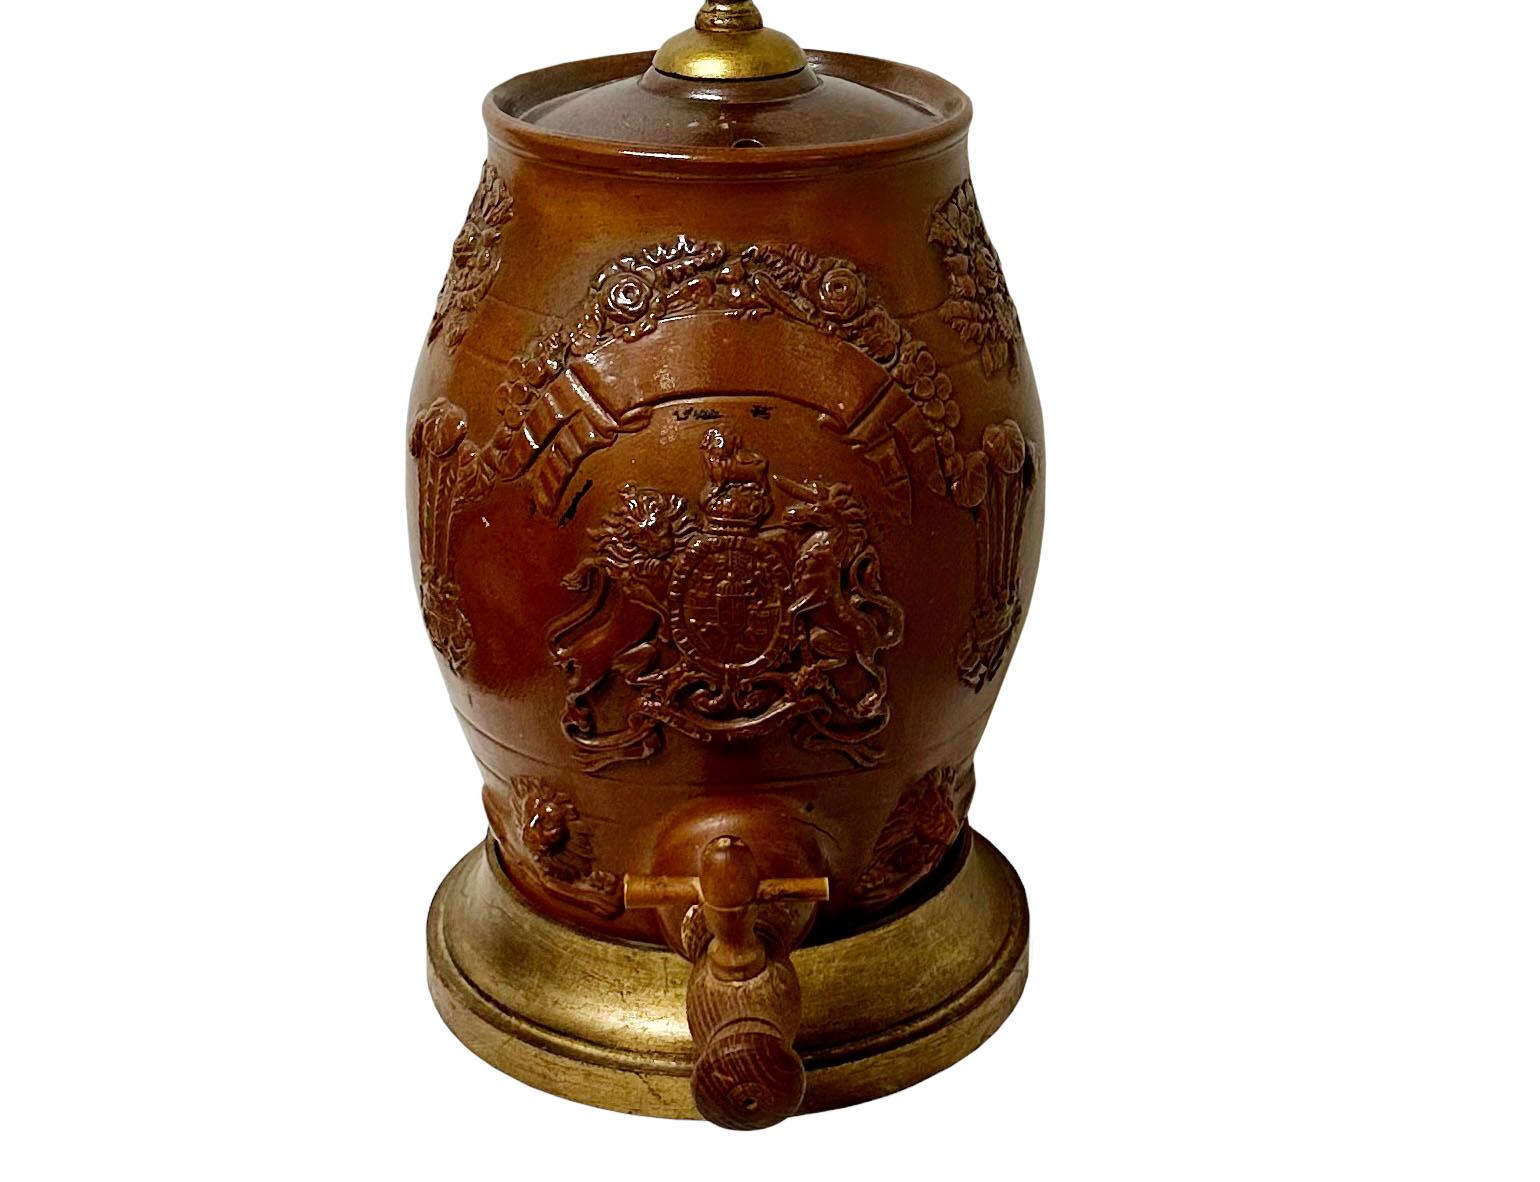 A 19th century English Redware jug made into a lamp with its wooden spigot and custom gold gilt wooden base.